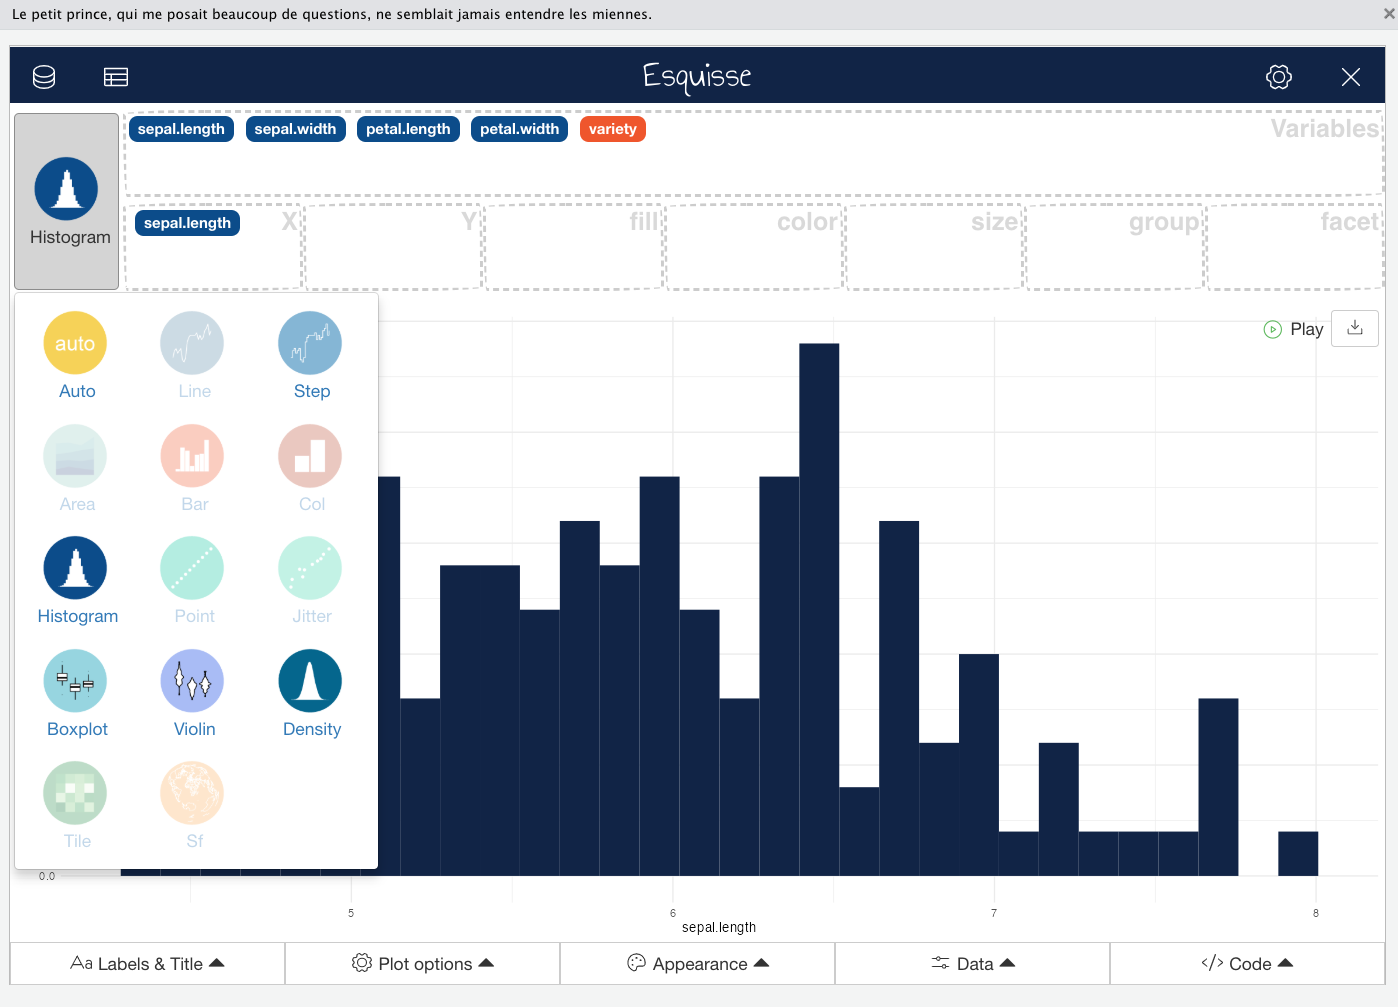 R Esquisse: How to Explore Data in R Through a Tableau-like Drag